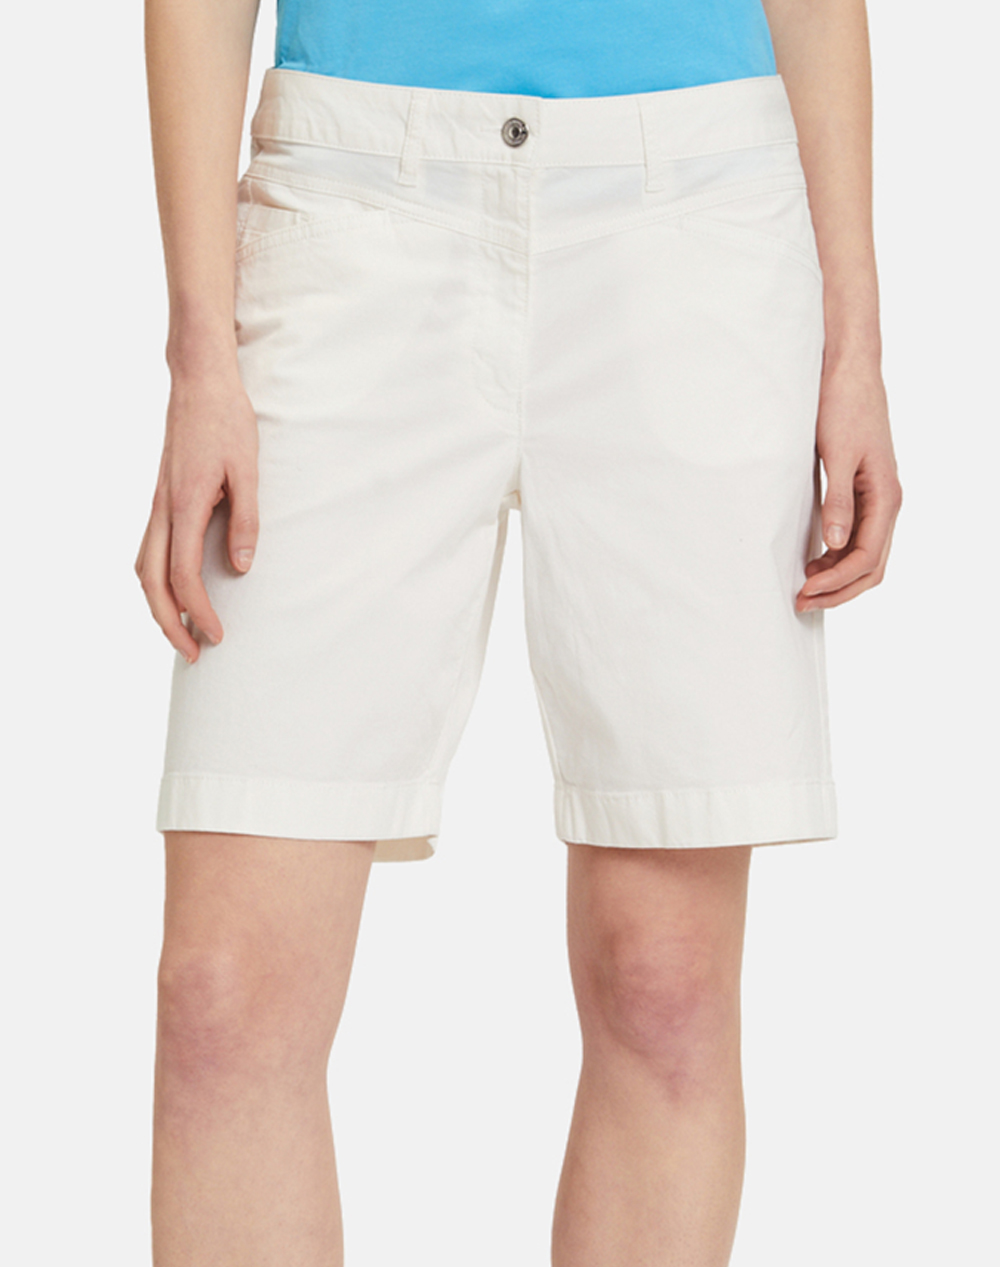 BETTY BARCLAY Short 6003/1200-1014 OffWhite